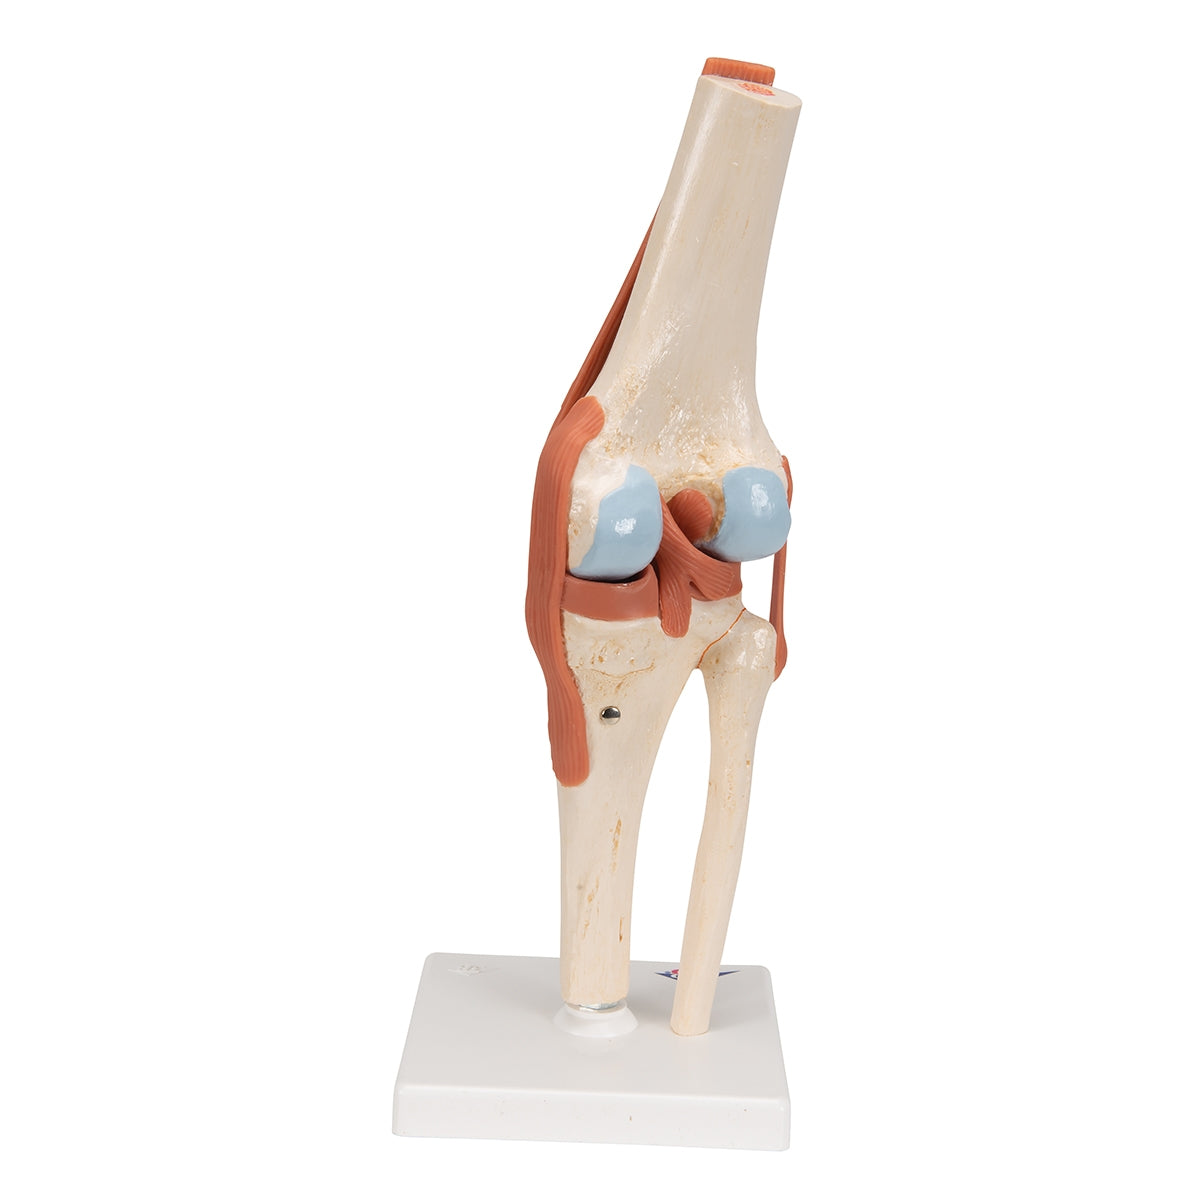 Functional Human Knee Joint Model with Ligaments & Marked Cartilage